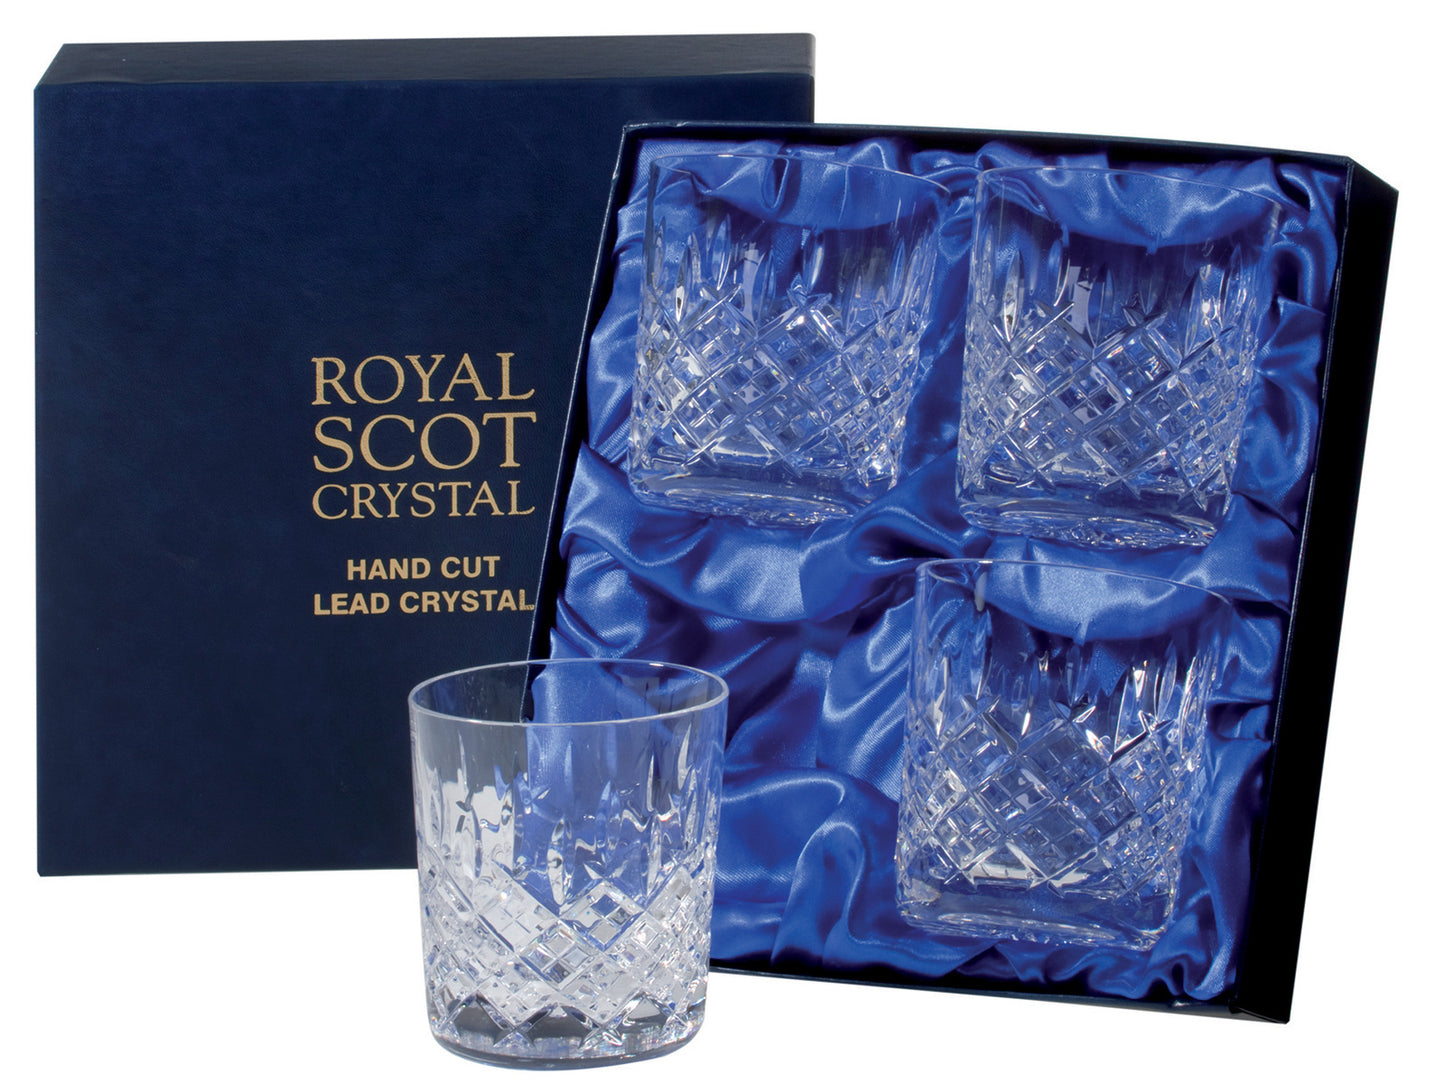 A set of four crystal whisky glasses, each engraved with a bed of diamonds at the base and single flicks reaching up towards the smooth rim. They come in a navy blue silk-lined presentation box with gold branding embossed on the lid.